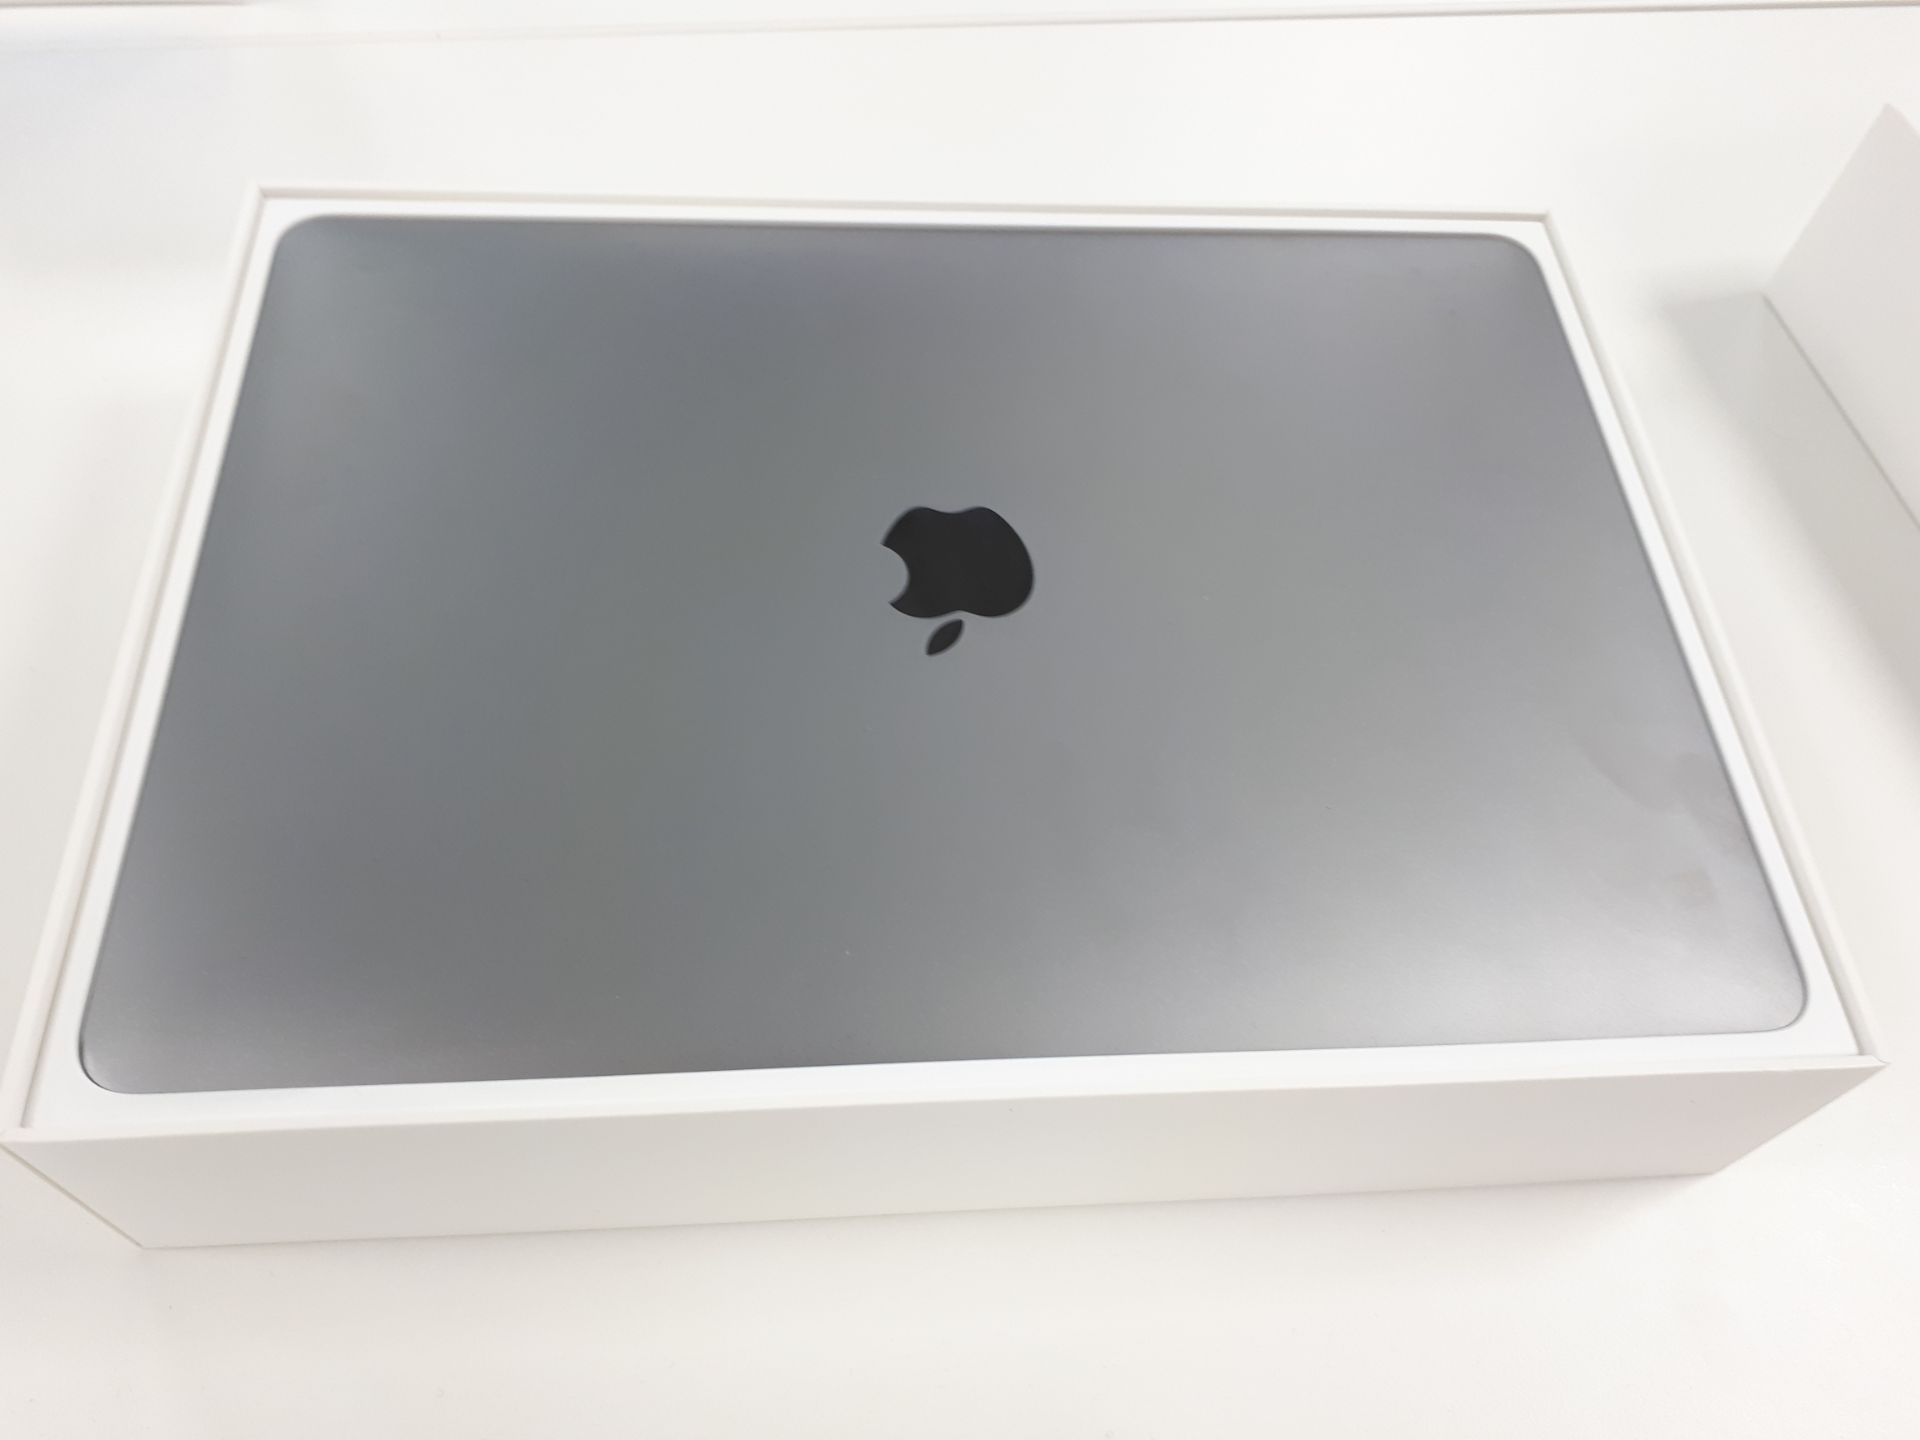 Apple A1708 13” Macbook Pro 2.3Ghz, 12GB Ram, Serial Number FVXL01U9JP, Space Grey with 2 x Novoo - Image 2 of 3